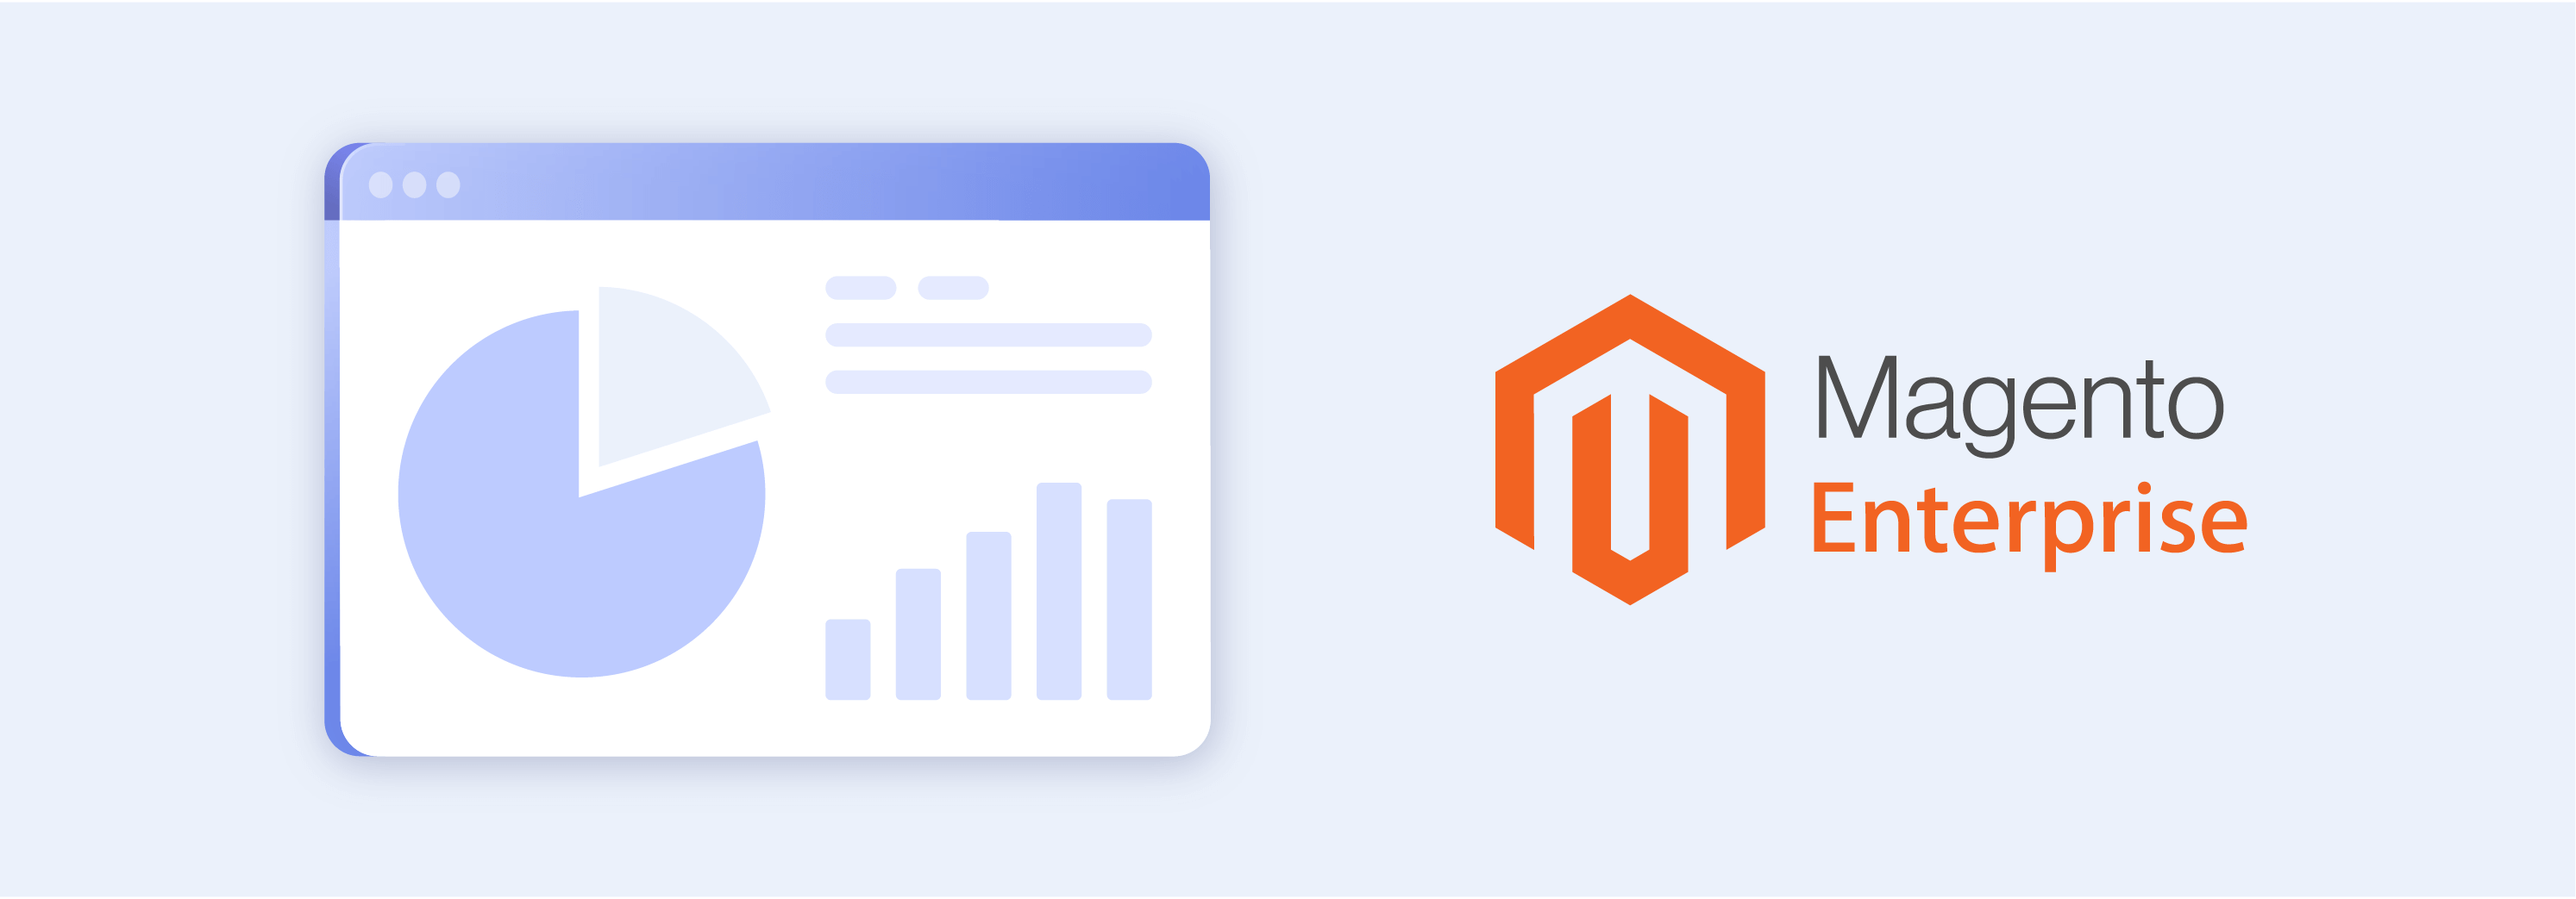 Overview of Magento 2 Enterprise Version for large businesses